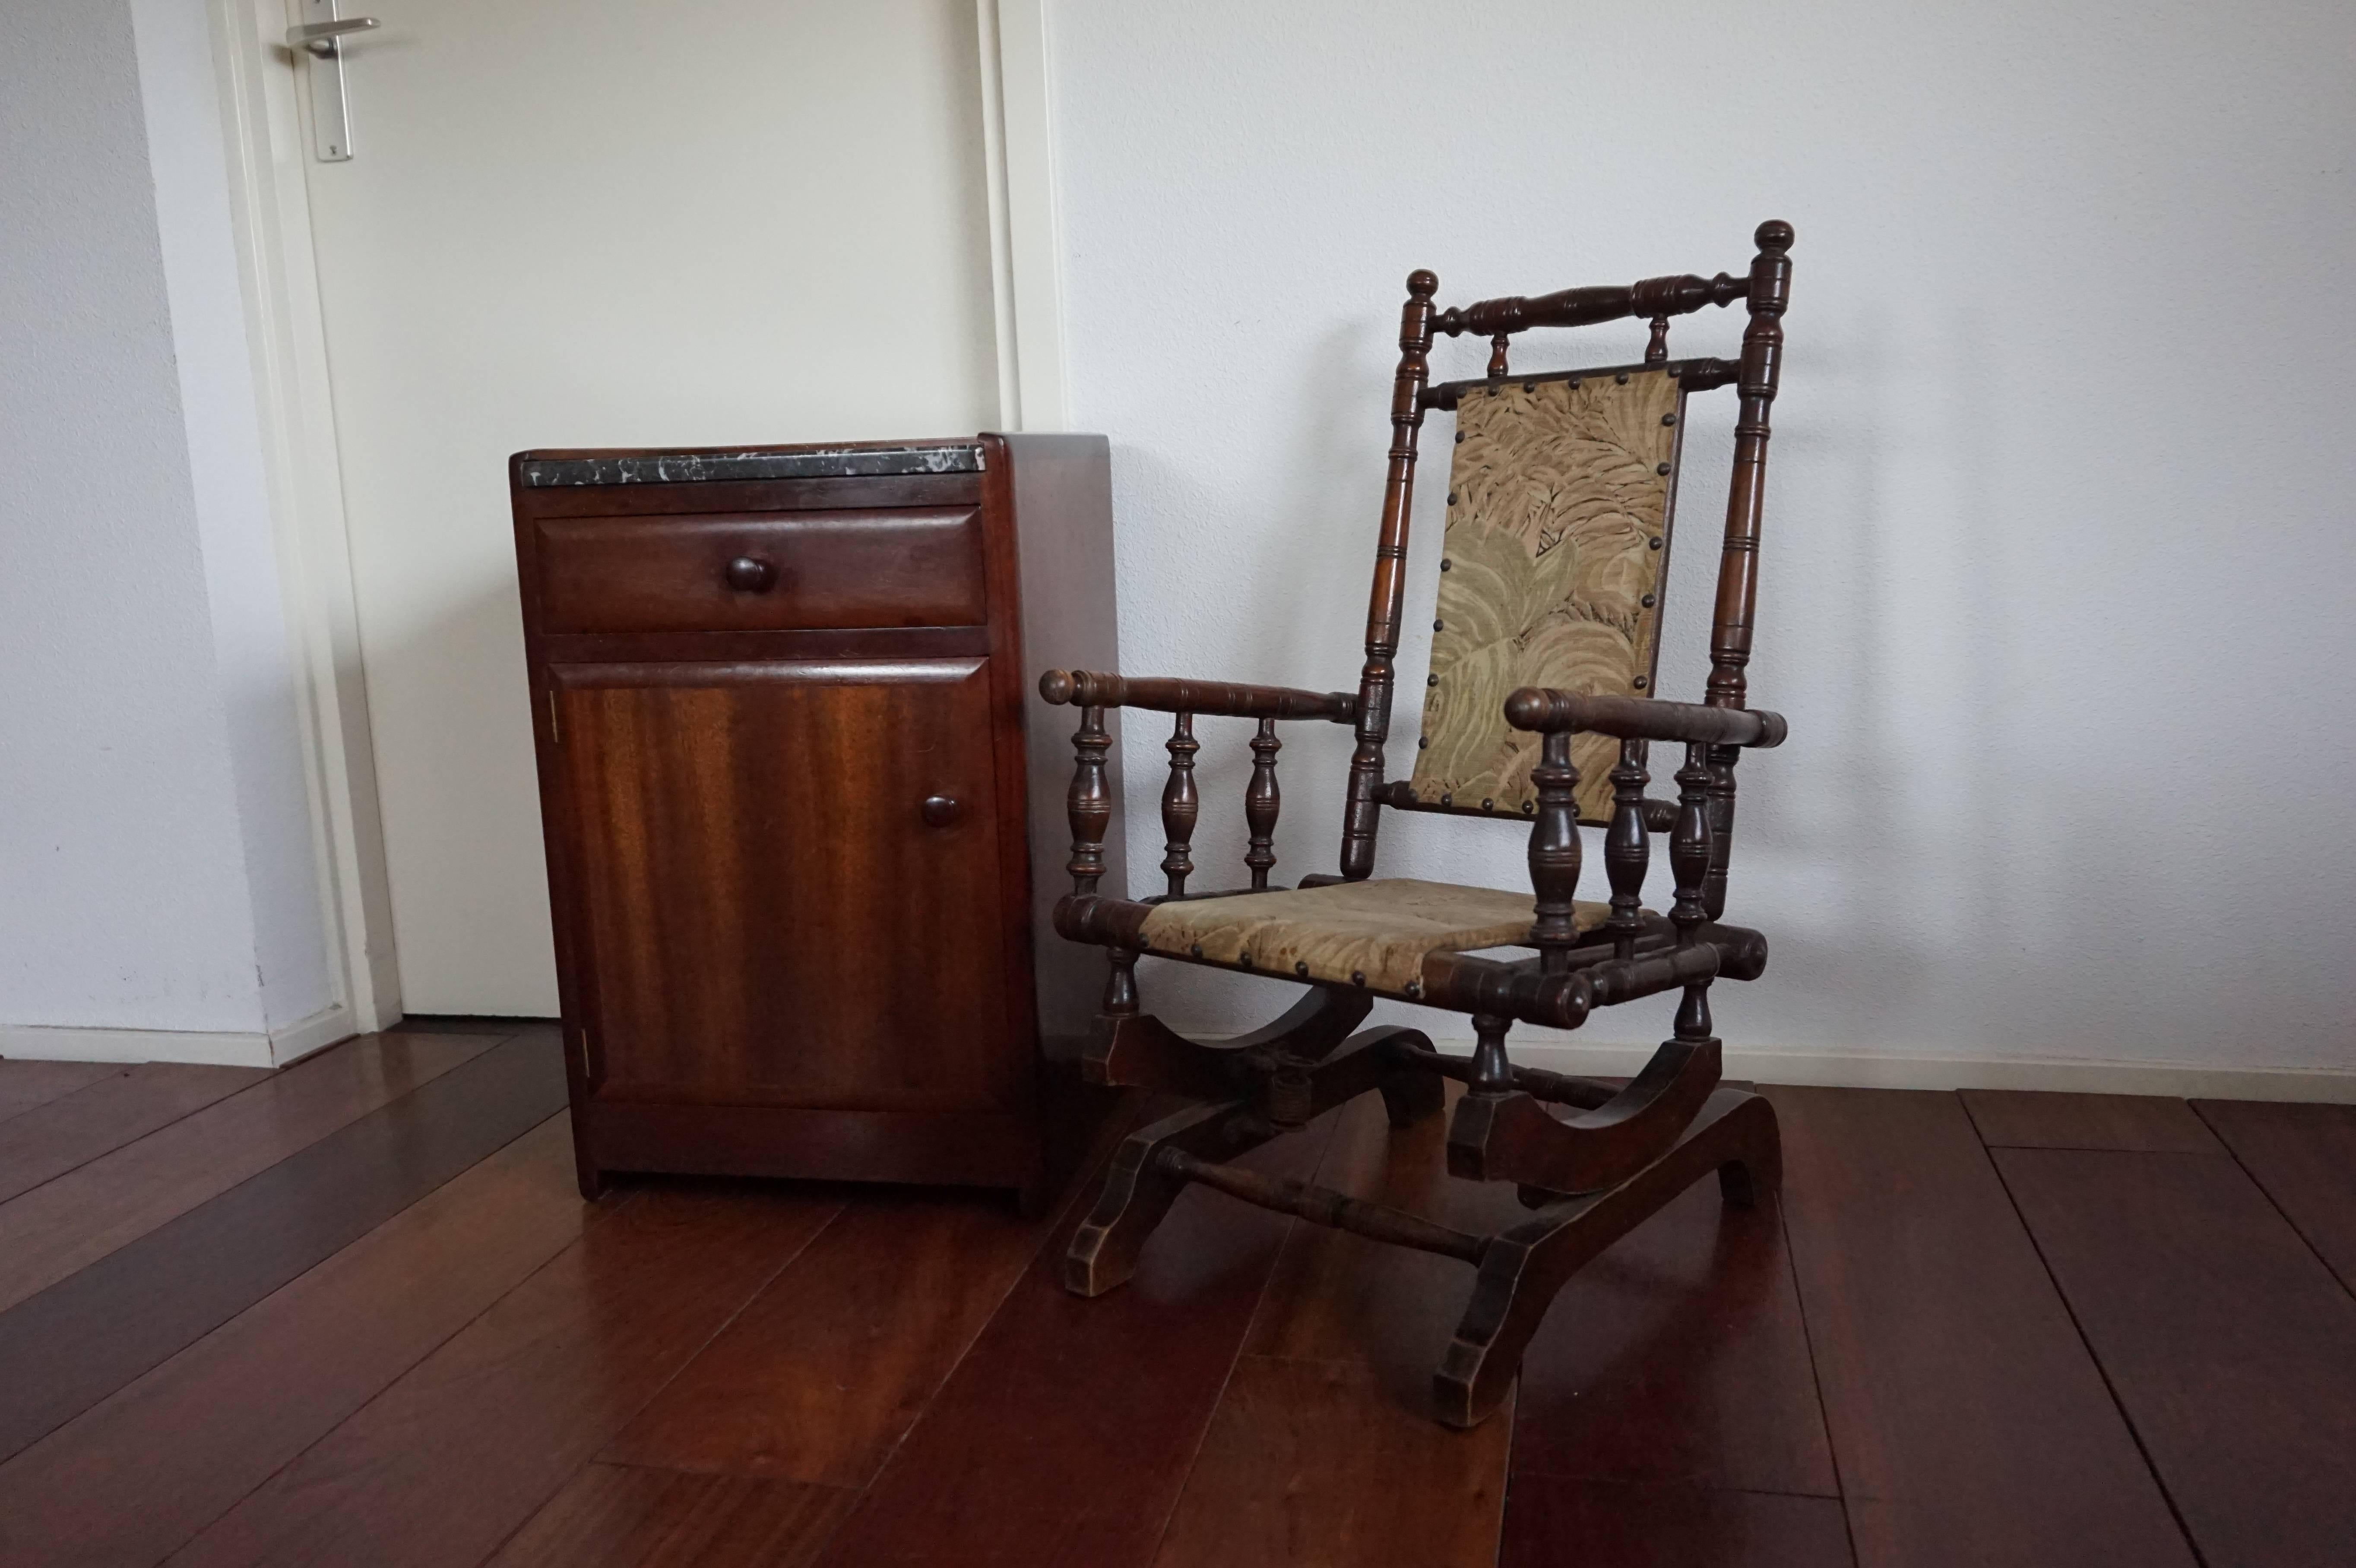 Beautiful and decorative small antique chair.

This handcrafted and rare American rocker for children is made of turned beech wood and it is in amazing condition. This stunning and extremely decorative little chair dates from circa 1880-1890 and it